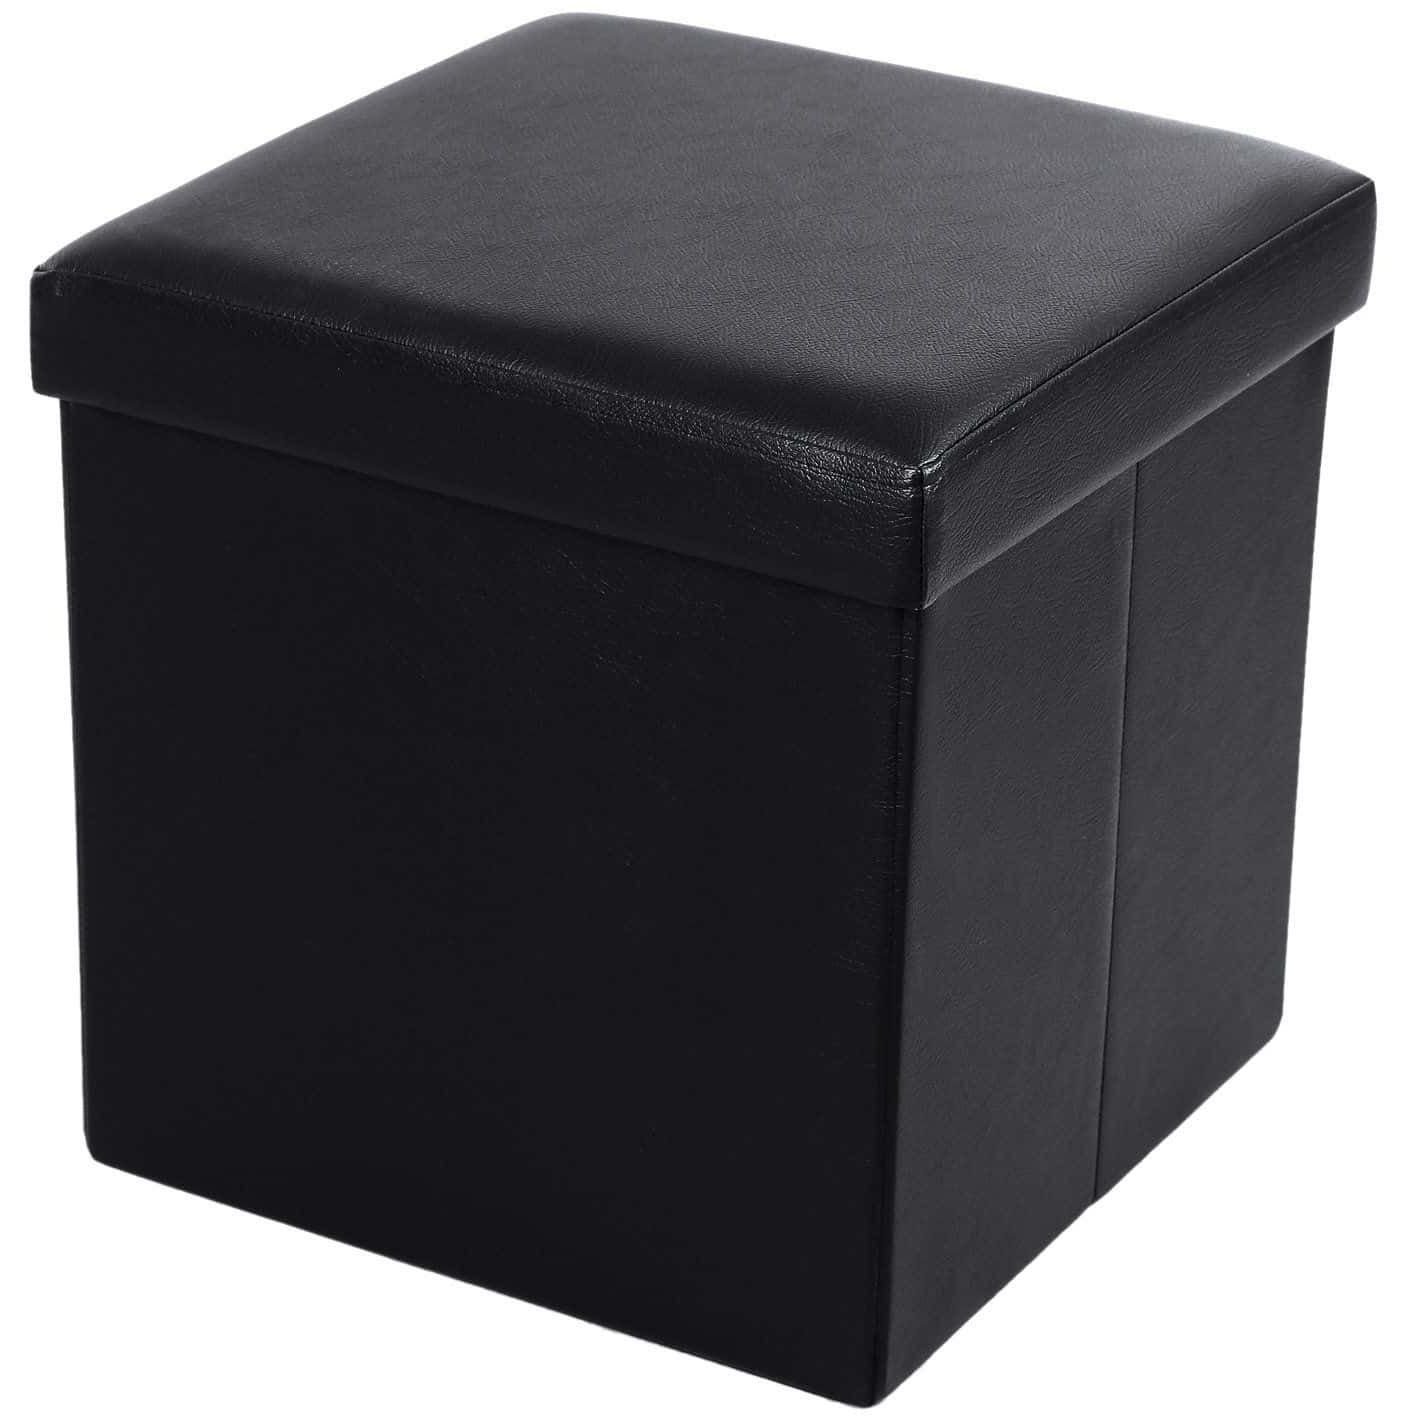 14 Best Small Ottoman Options For 2021! – Home Stratosphere Intended For Current Black Faux Leather Cube Ottomans (View 2 of 10)